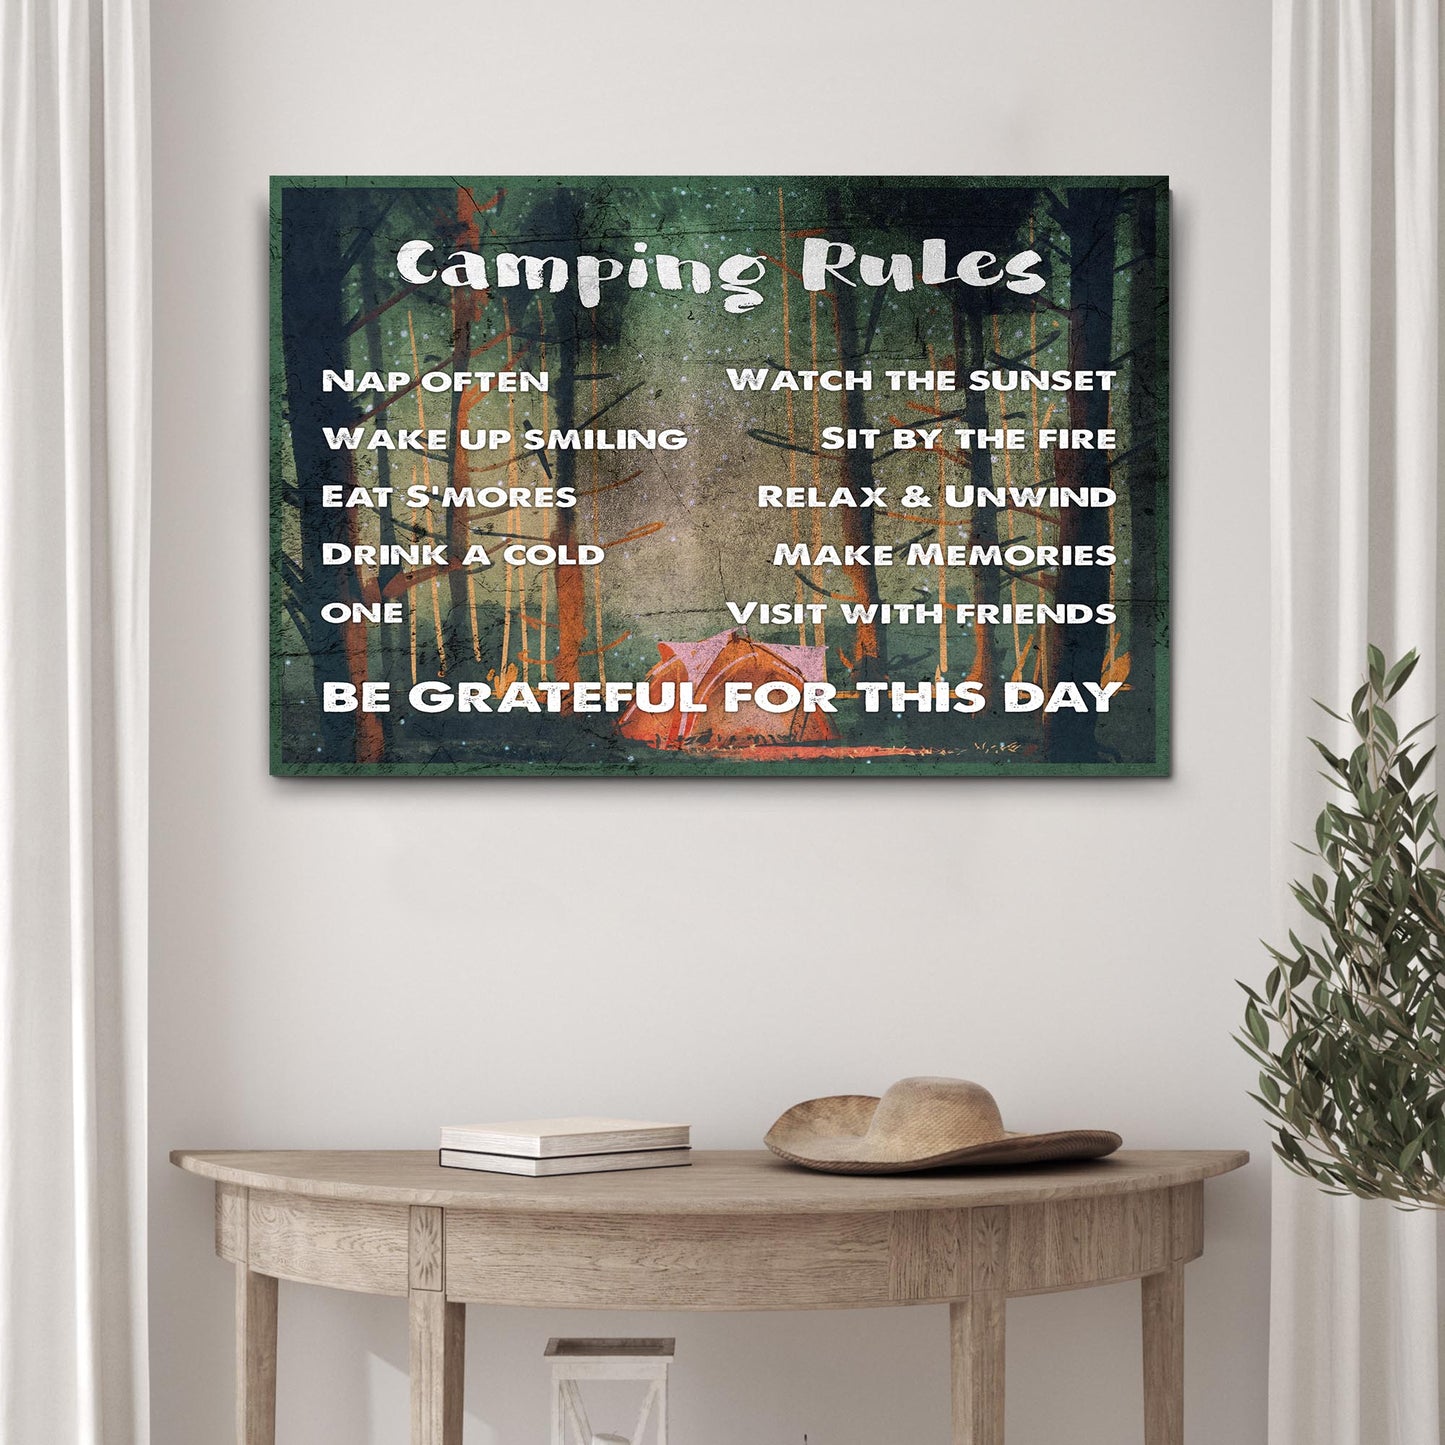 Camping Rules Sign - Image by Tailored Canvases